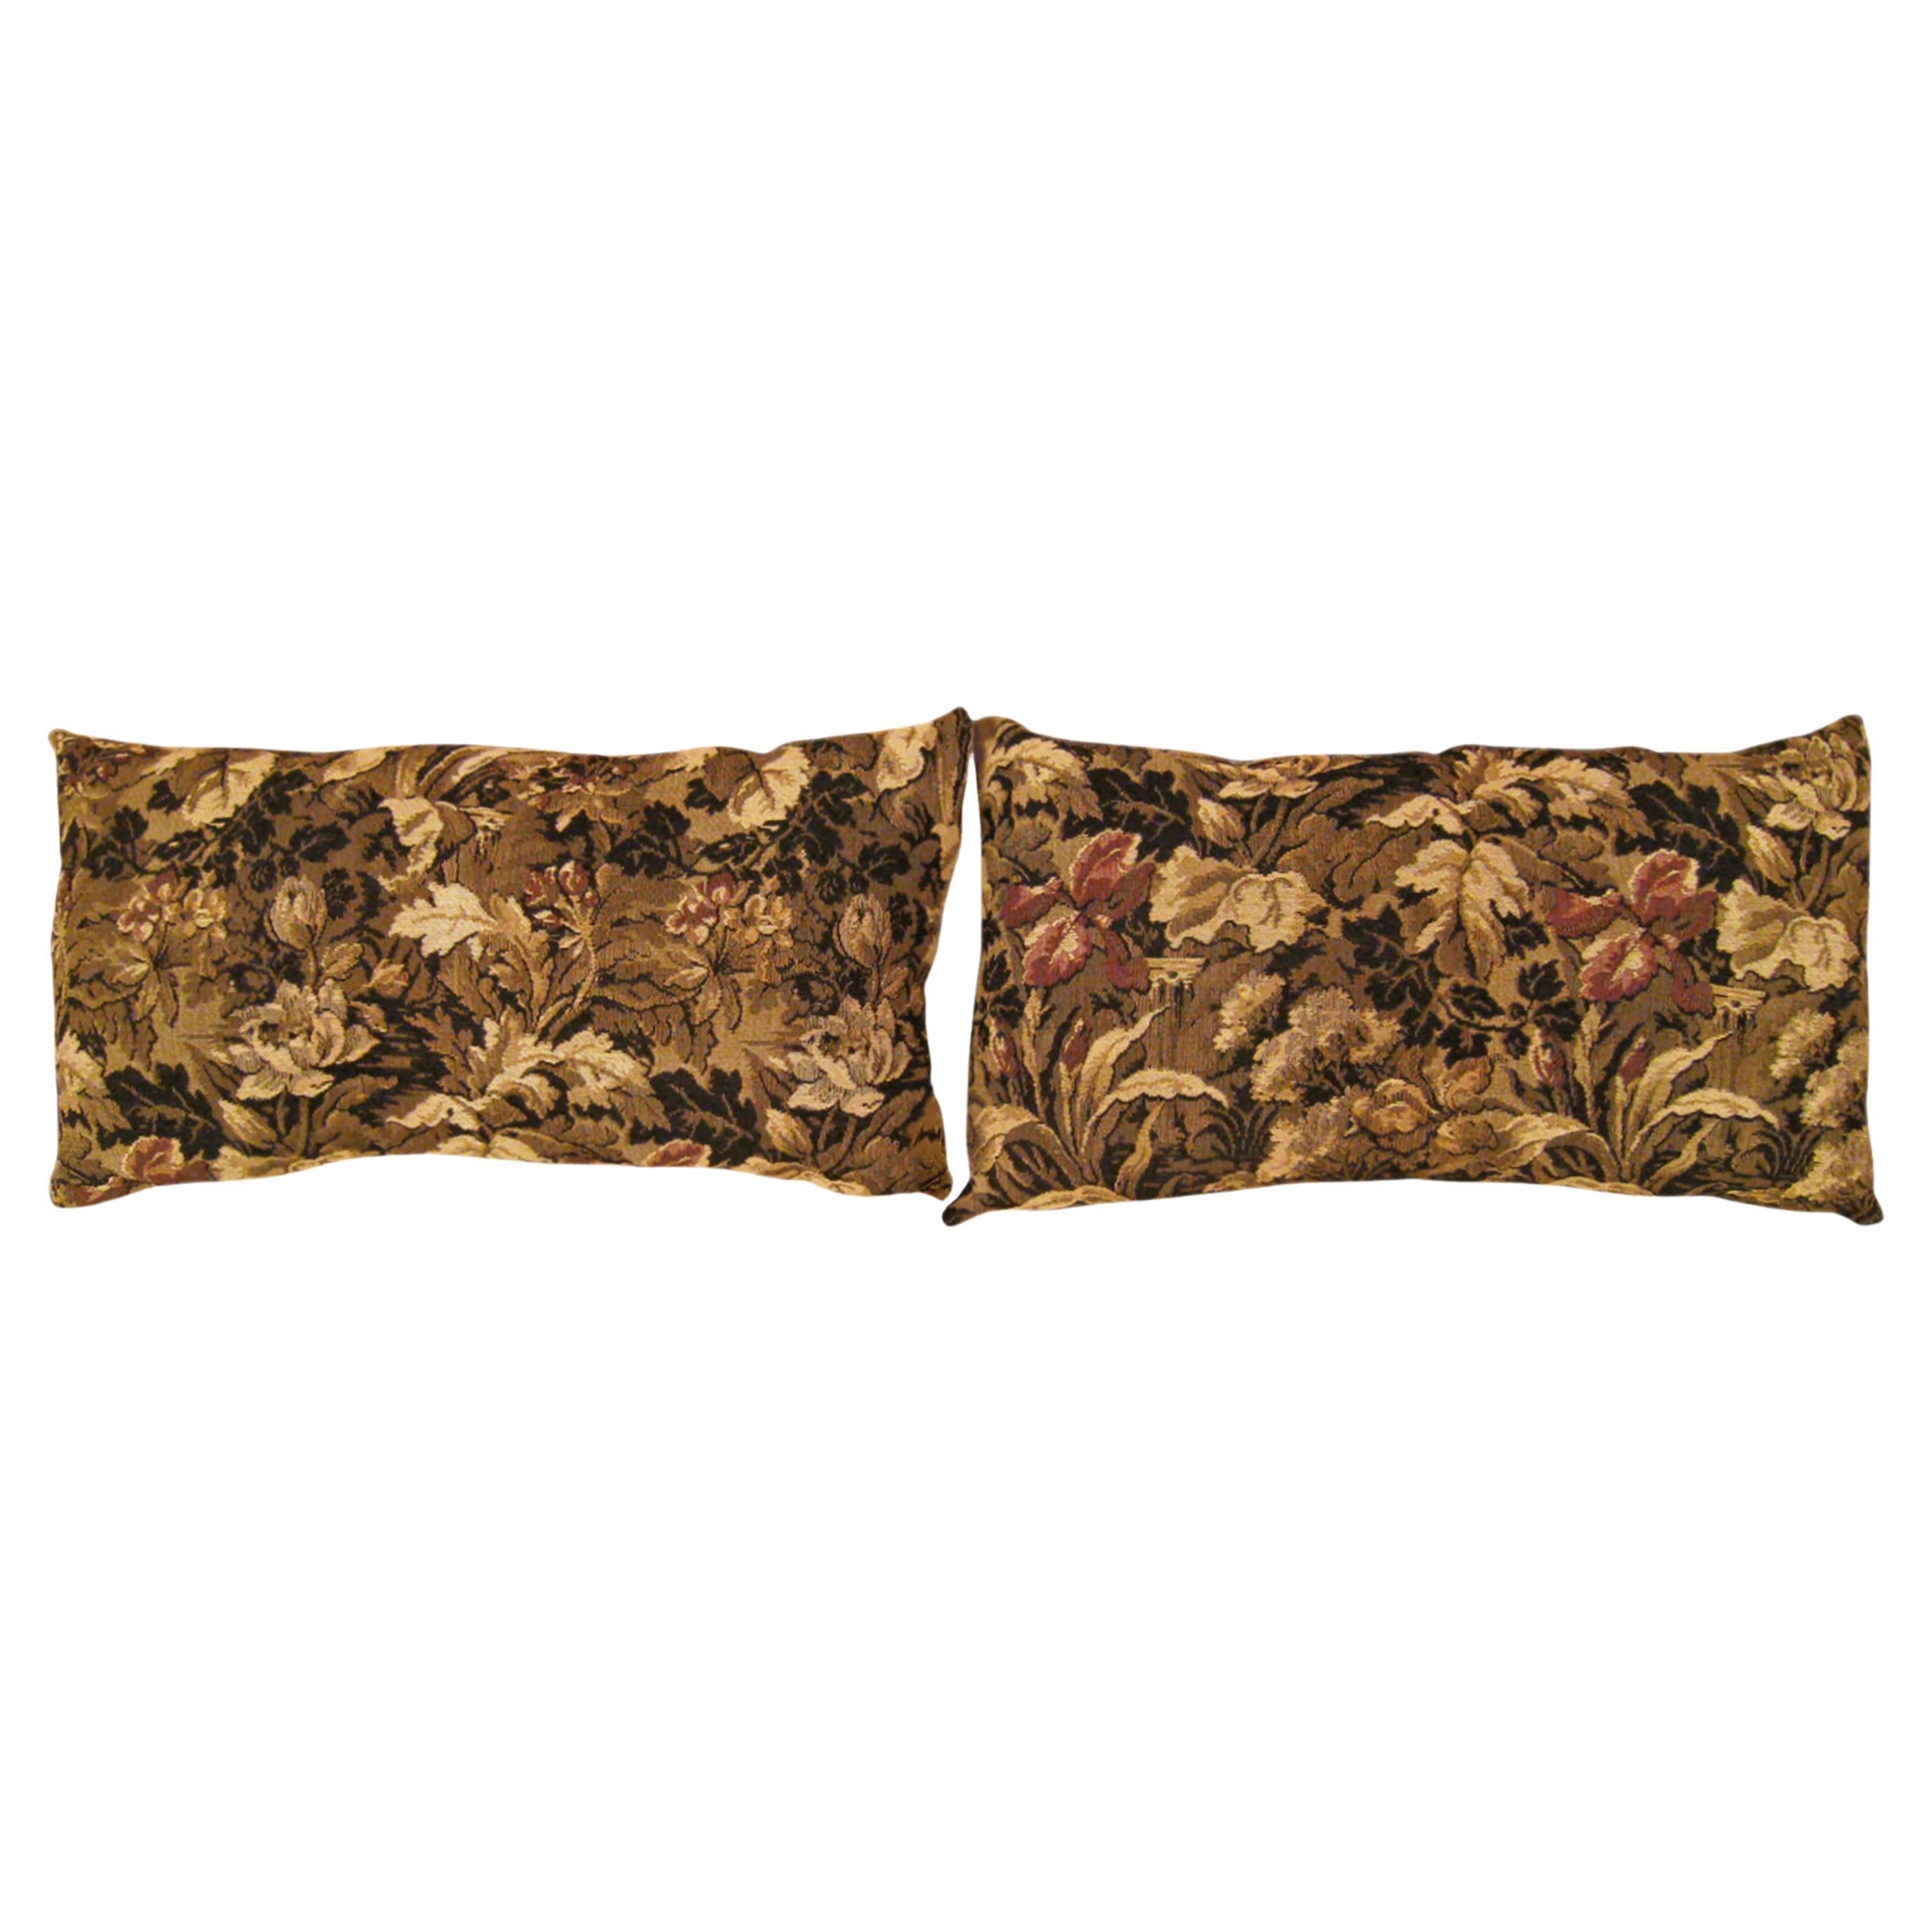 Pair of Decorative Antique Jacquard Tapestry Pillows with a Garden Design